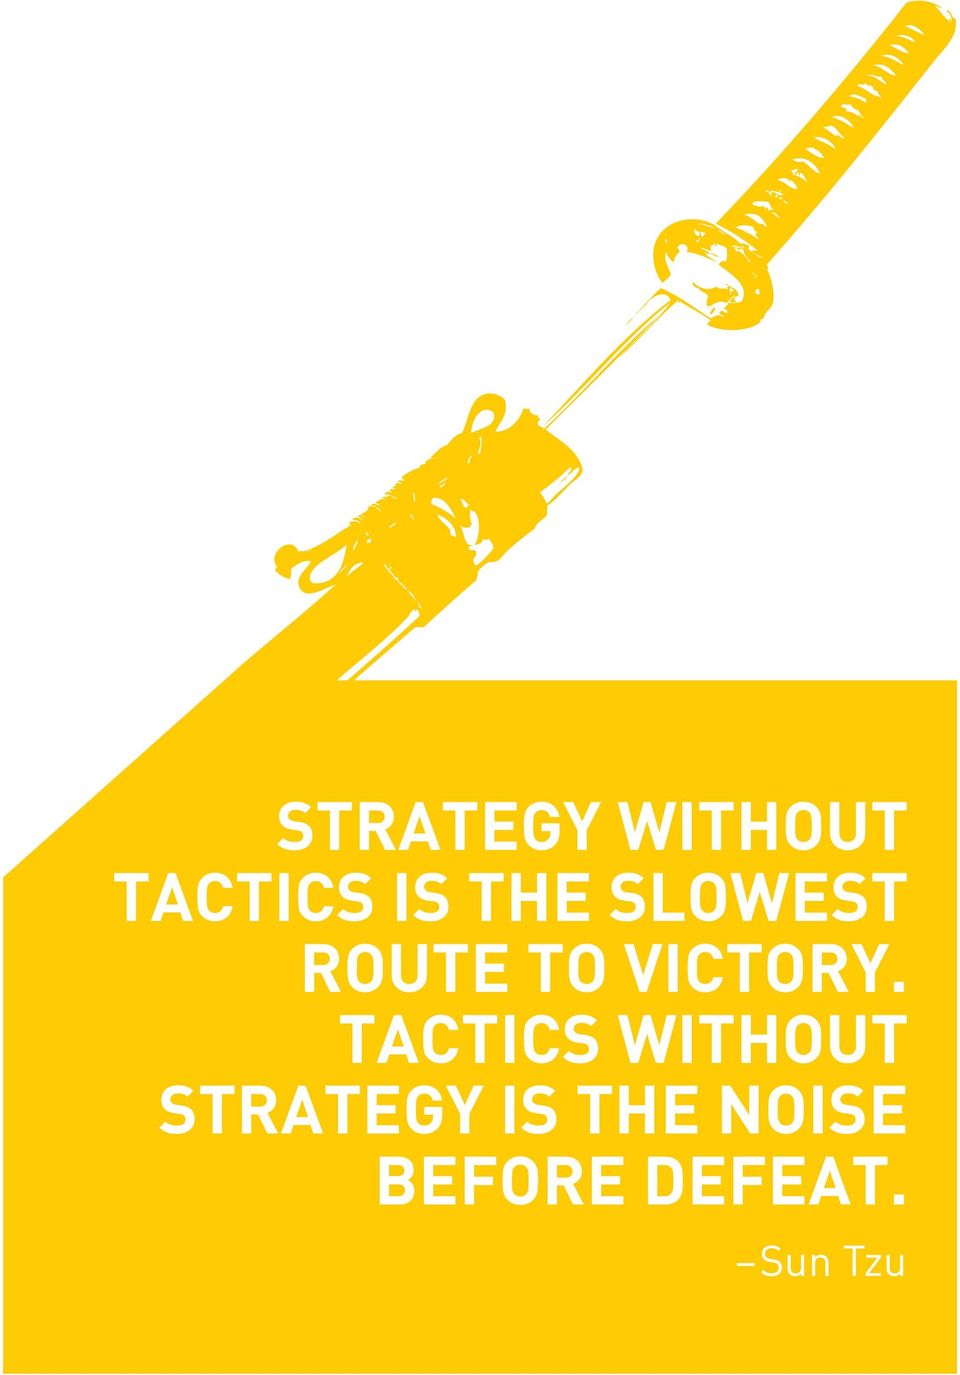 TACTICS WITHOUT STRATEGY IS